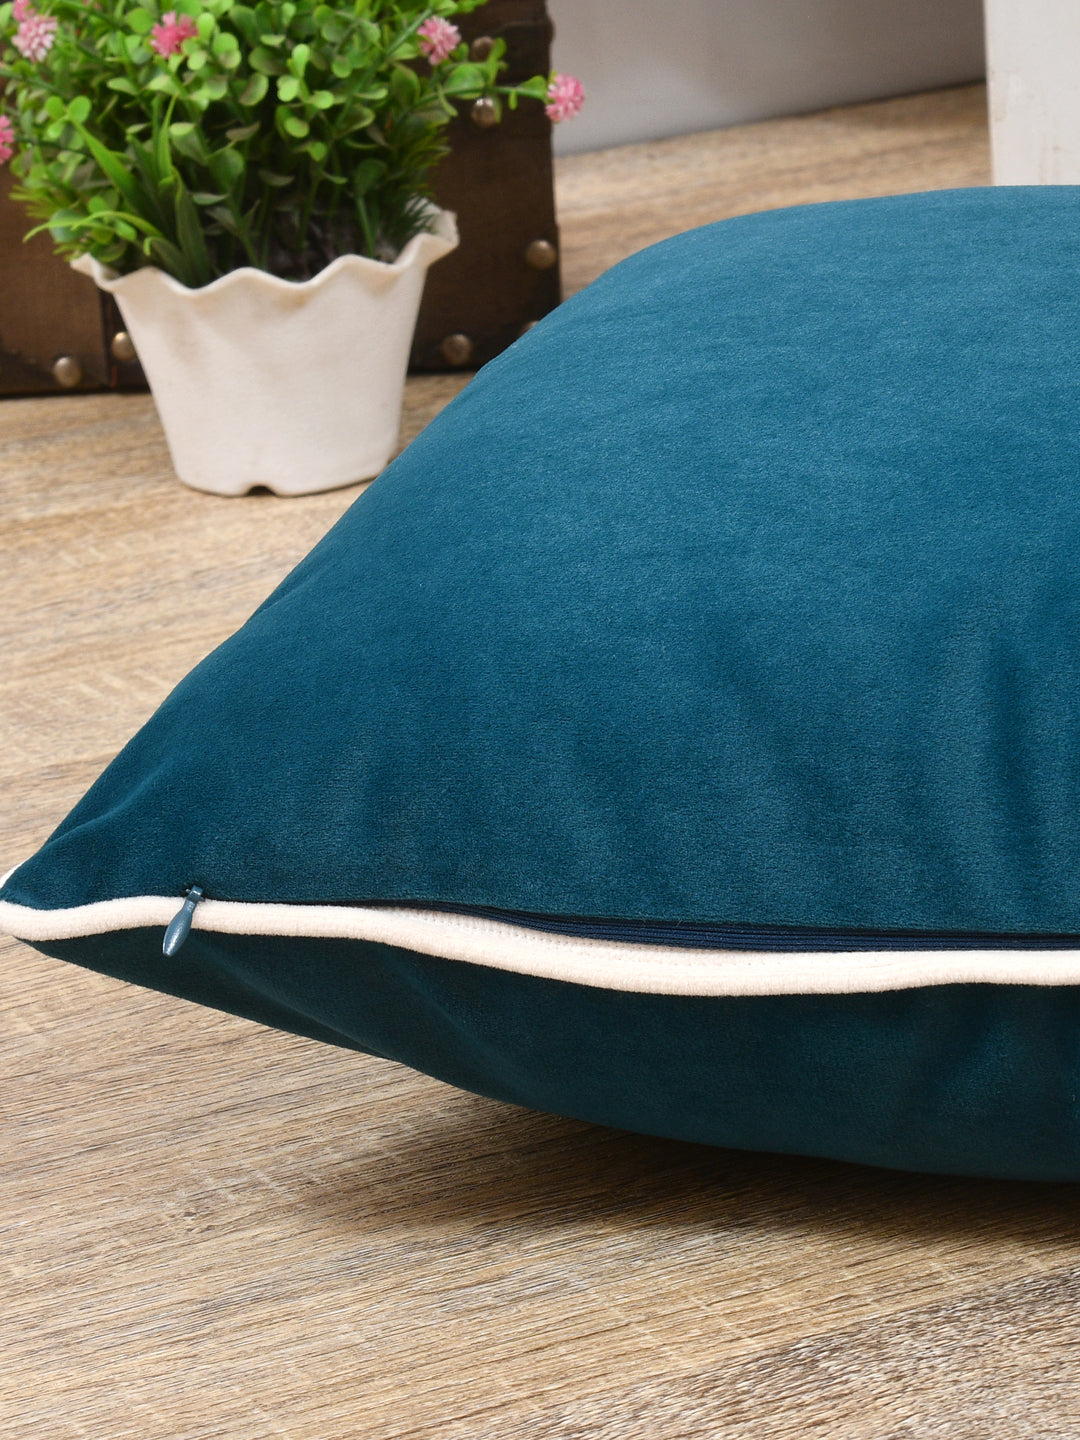 Velvet Cushion Covers; Set of 3; Teal With White Piping